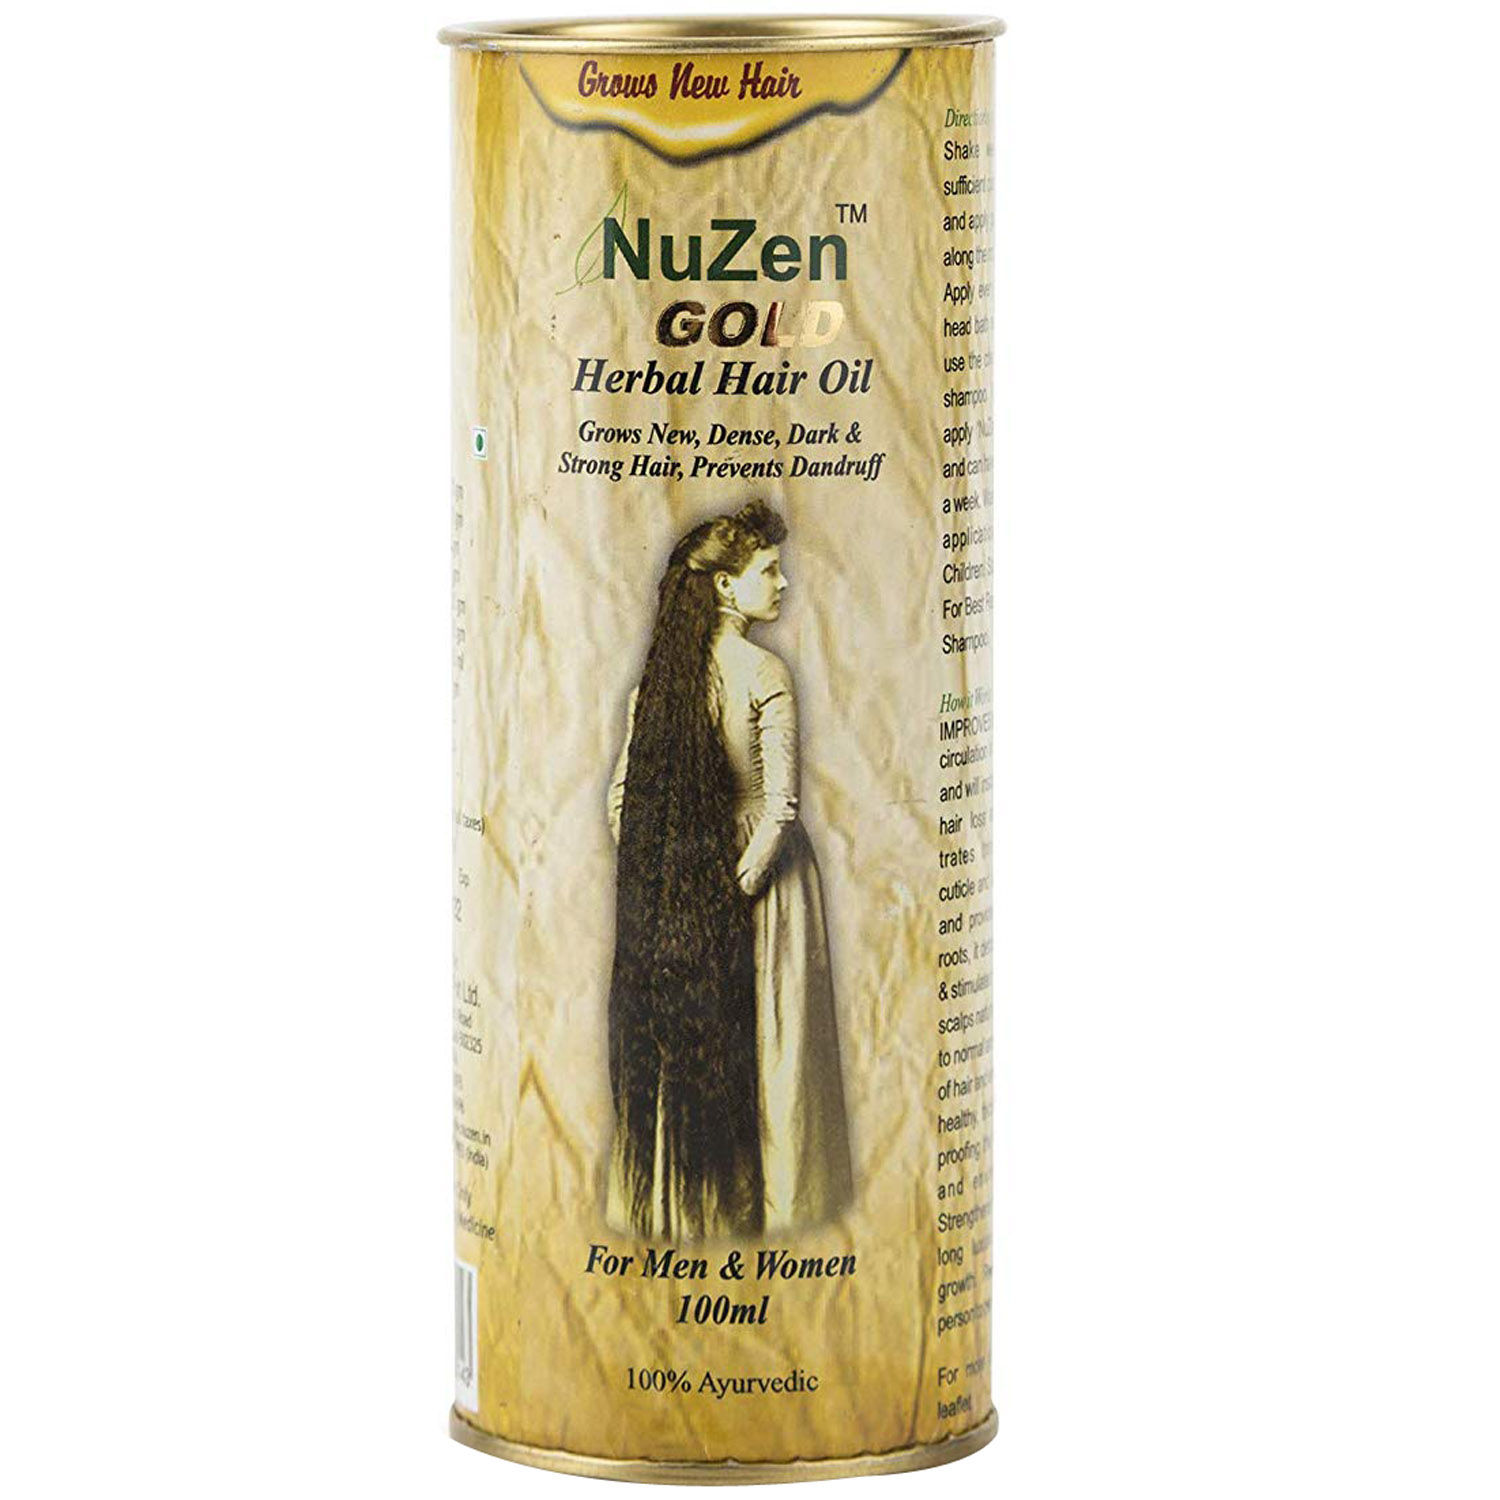 Nuzen Gold Herbal Hair Oil, 100 ml Price, Uses, Side Effects, Composition -  Apollo Pharmacy